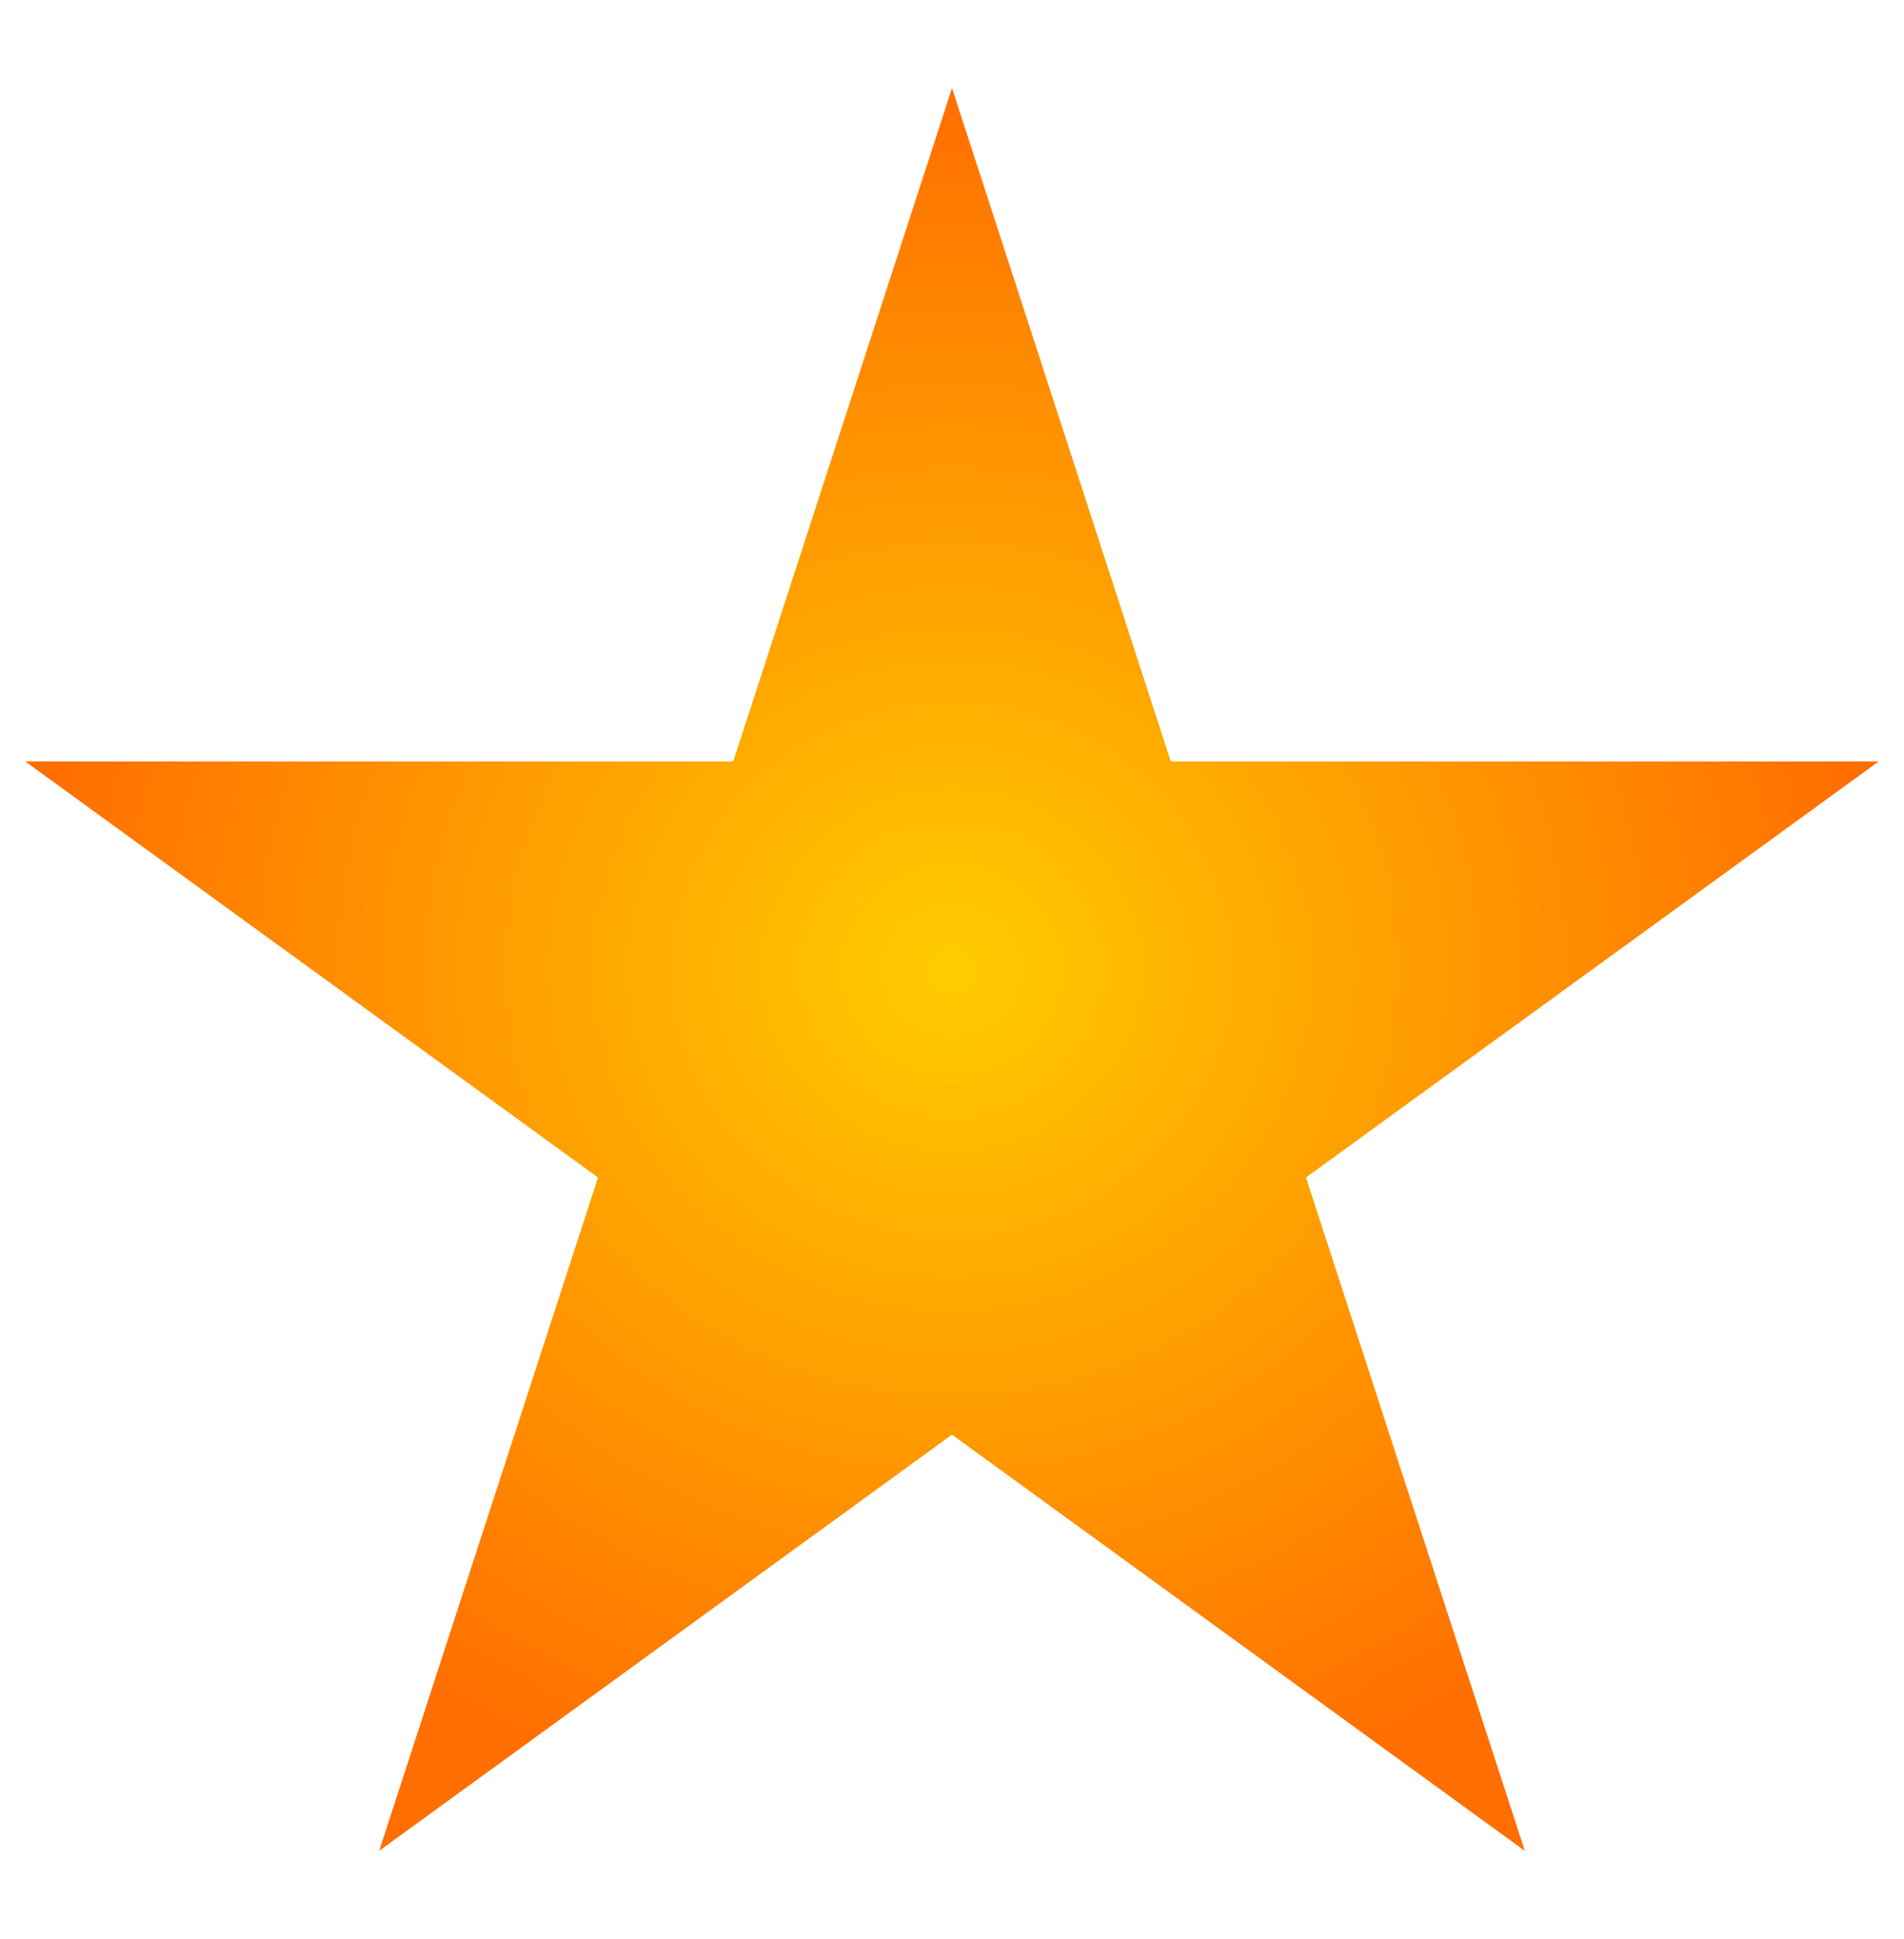 Star PNG image, free picture download